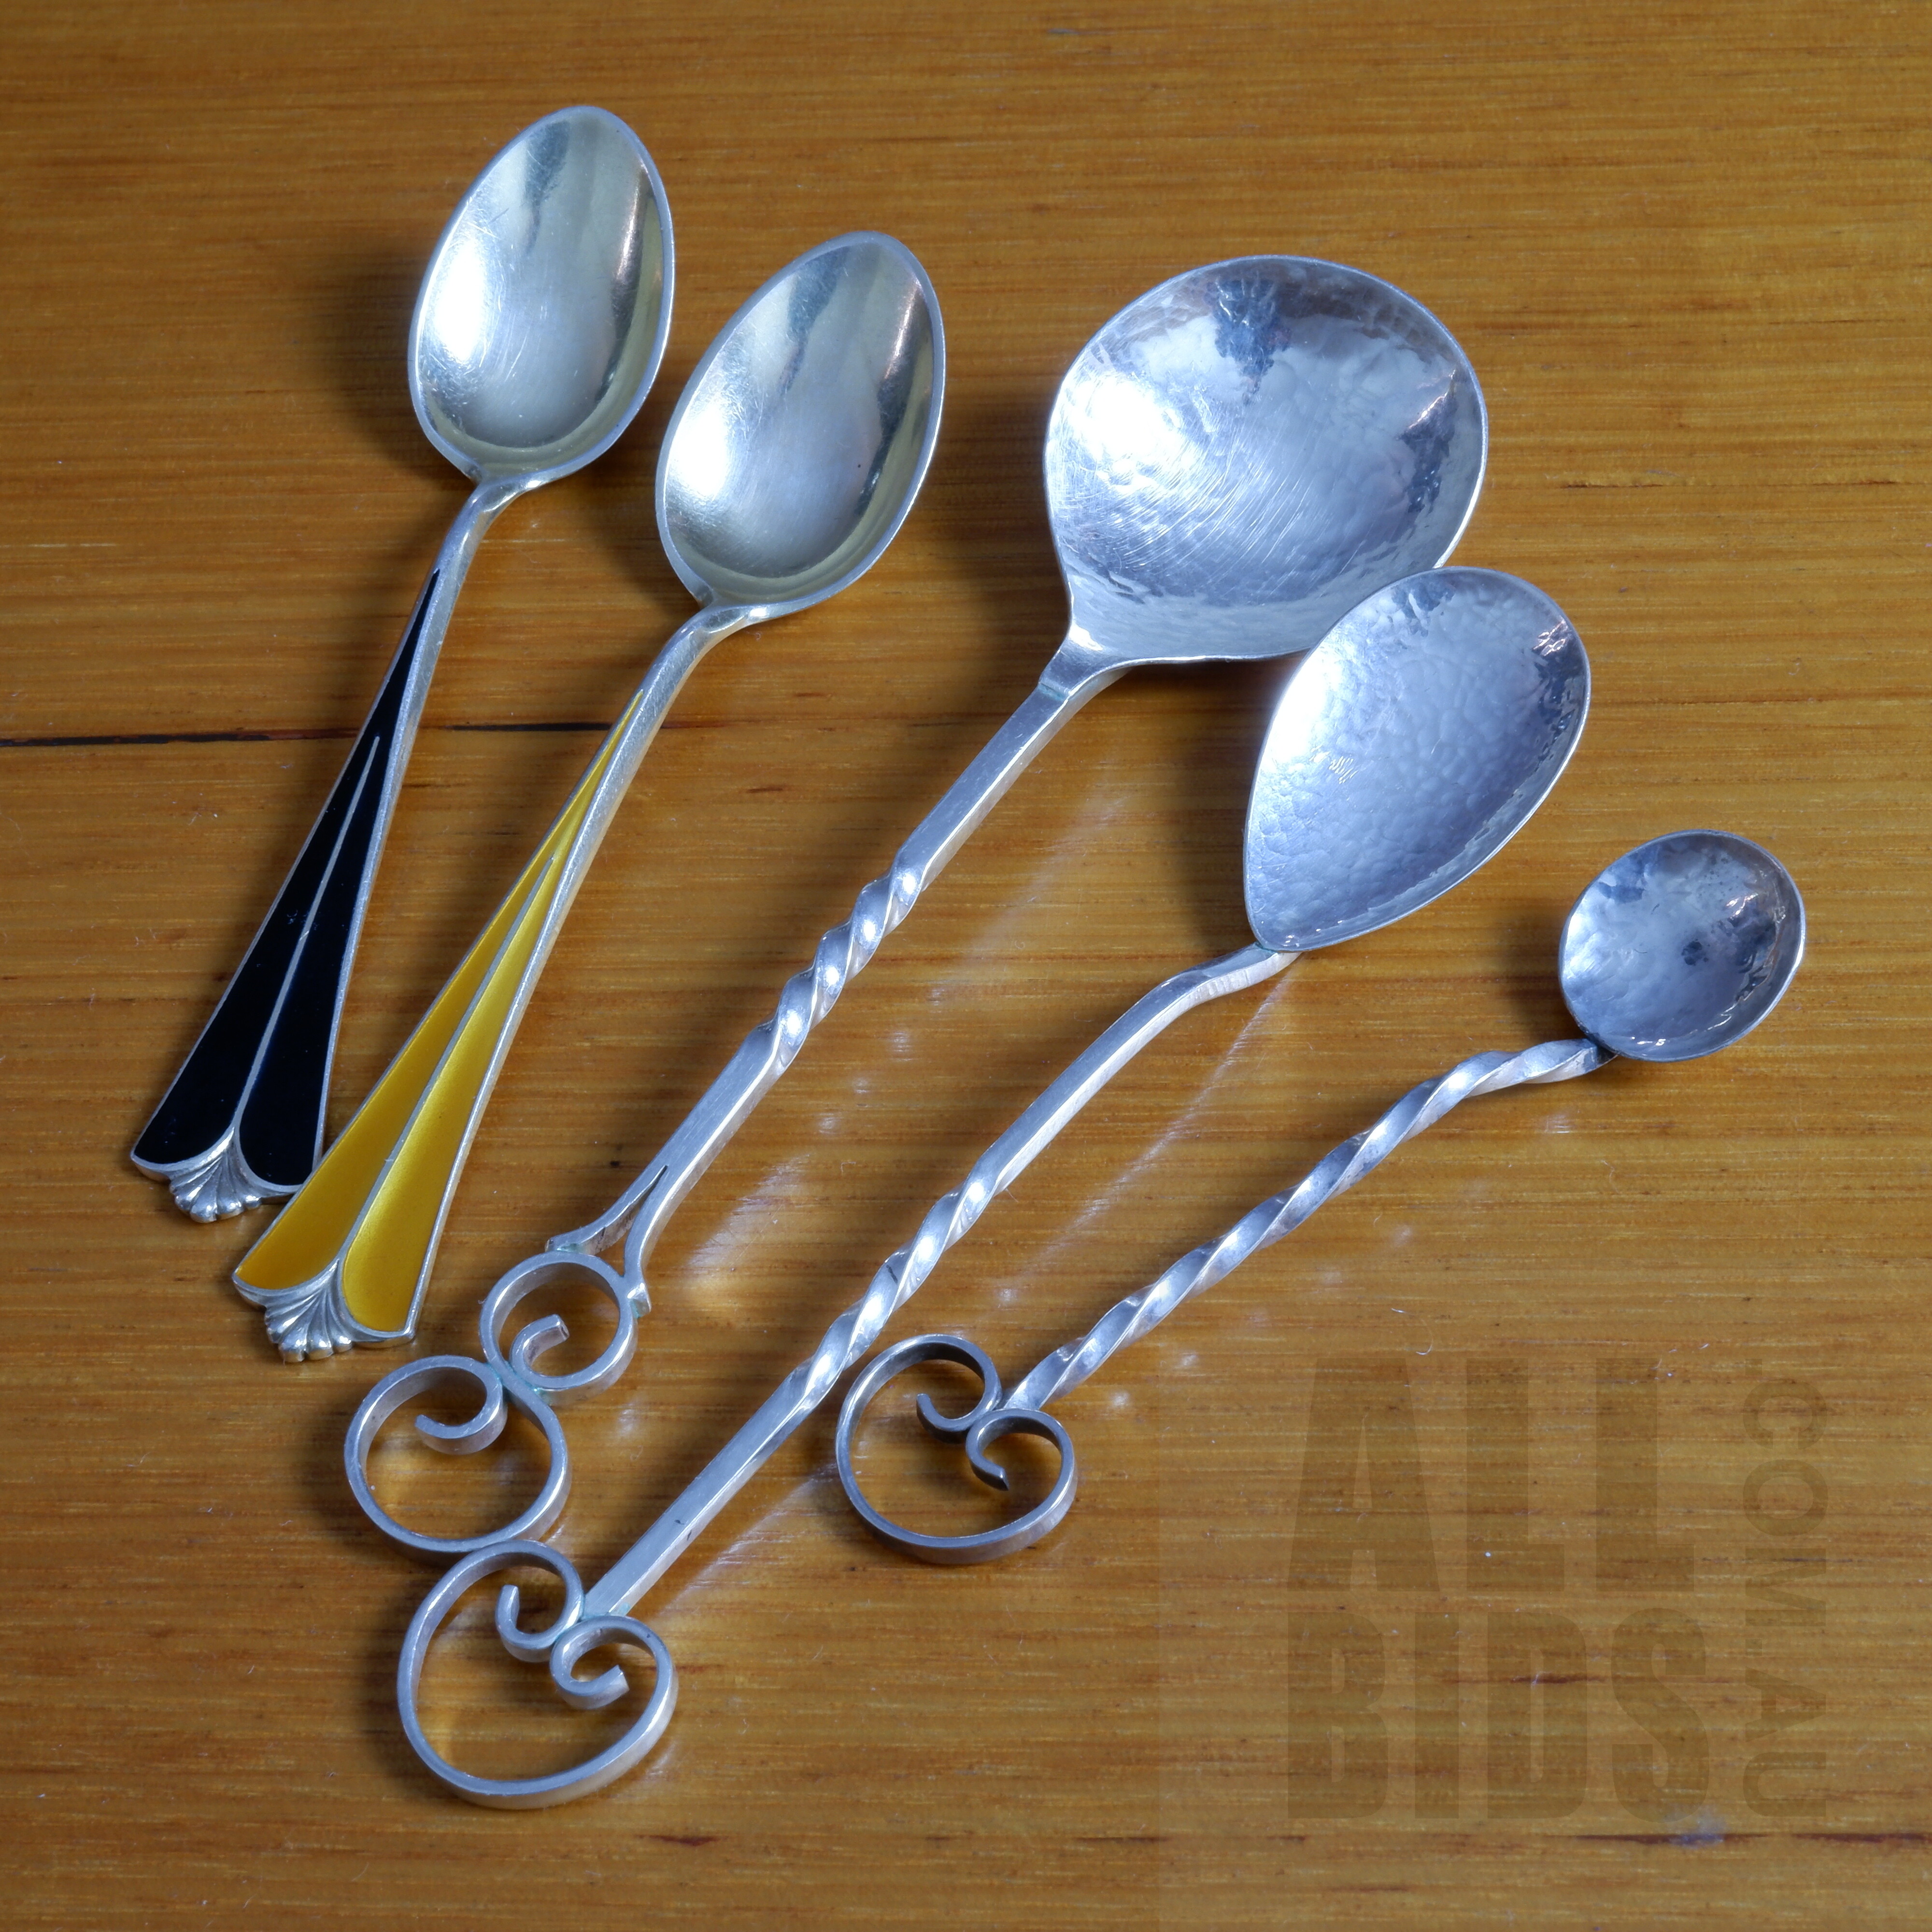 'Three Sterling Silver Sugar Spoons in the Manner of Sargisons, Tasmania, 26g with Two David Anderson Norway Sterling Silver and Enamel Teaspoons, 19h'